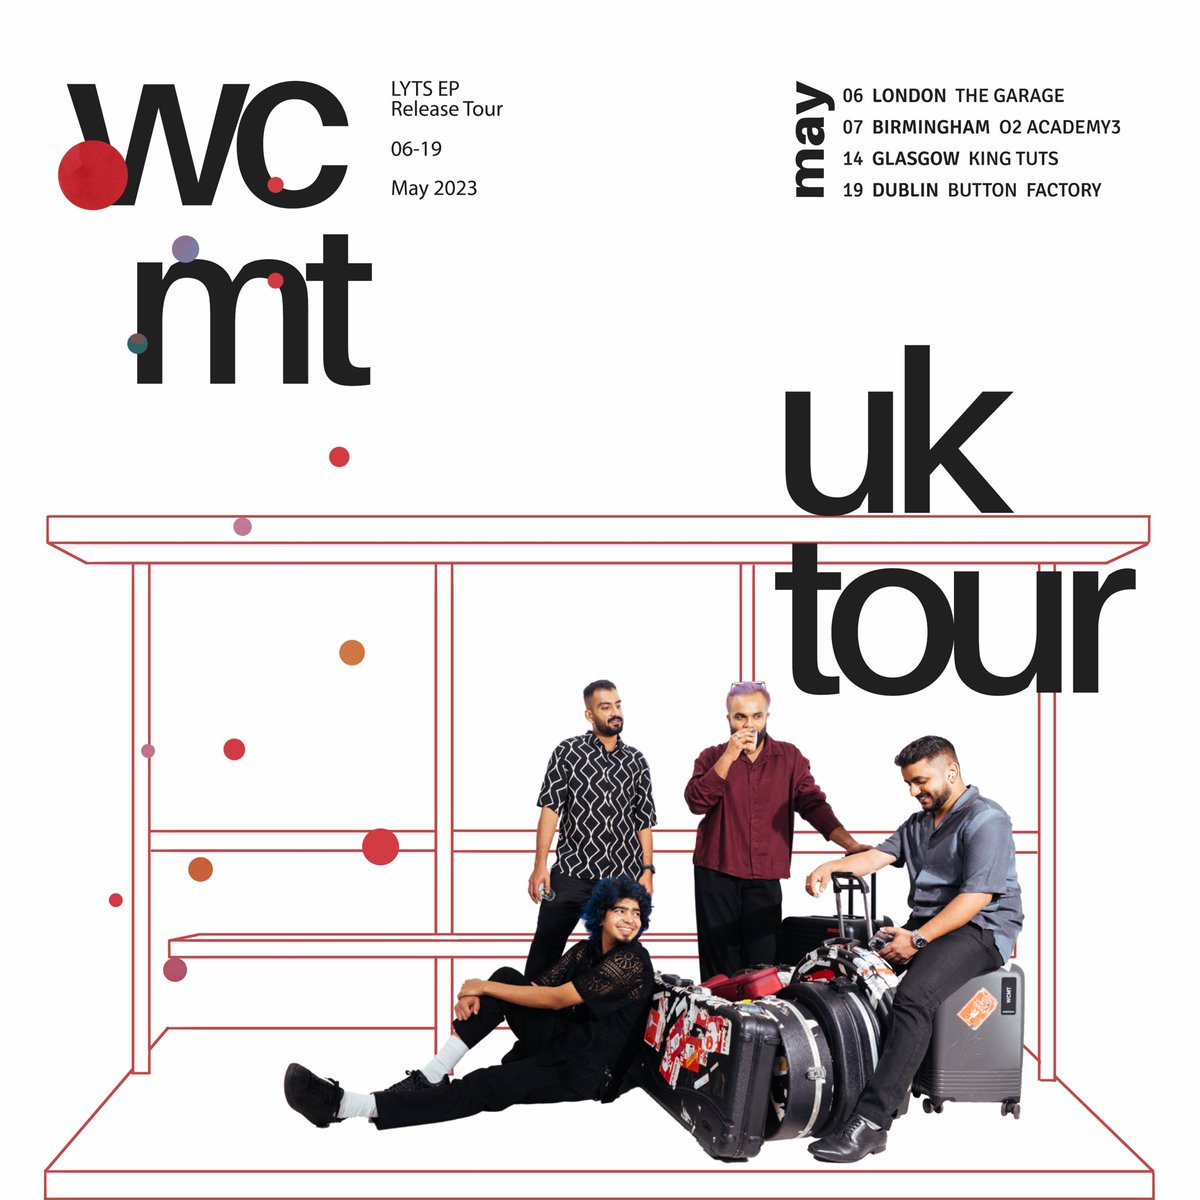 whenchaimettoast.com/tour.html UK & Ireland, going to be performing all of the new EP for you all.